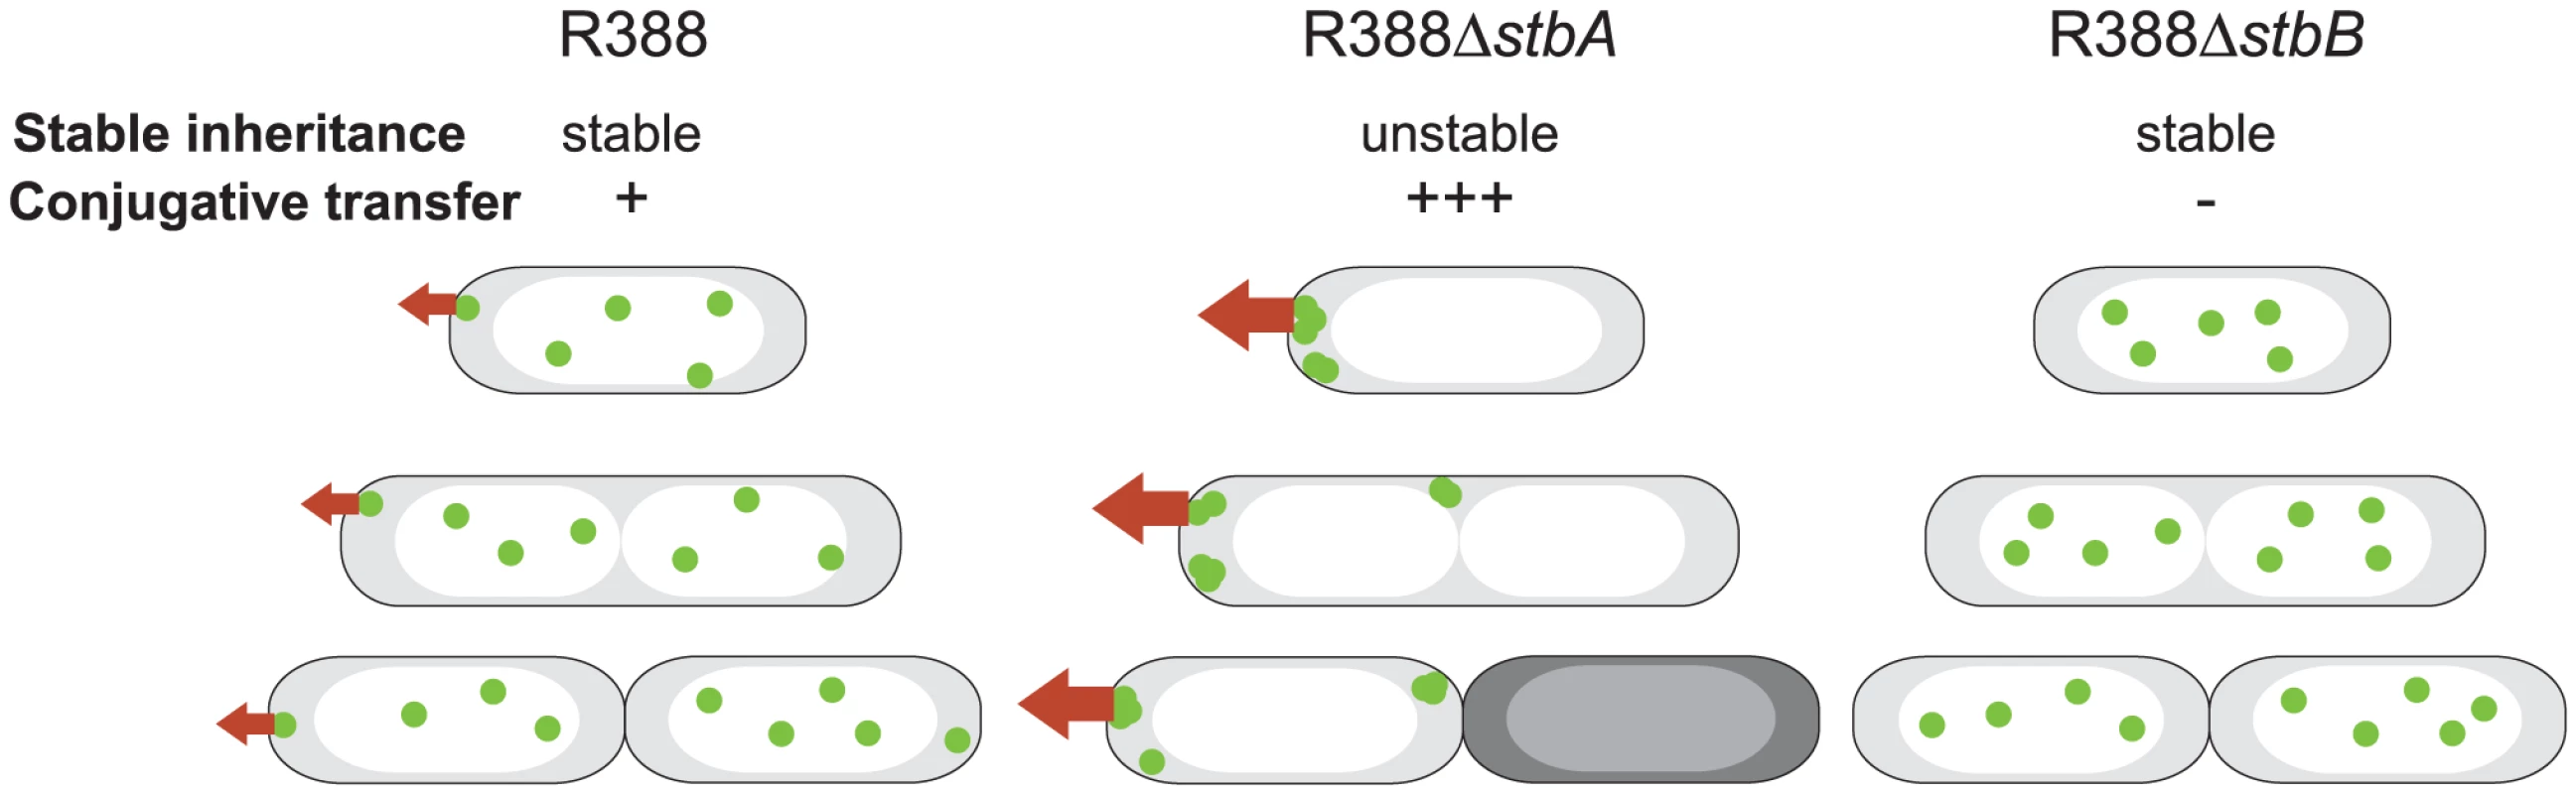 A schematic model to explain the behavior of <i>stb</i> mutants of plasmid R388.